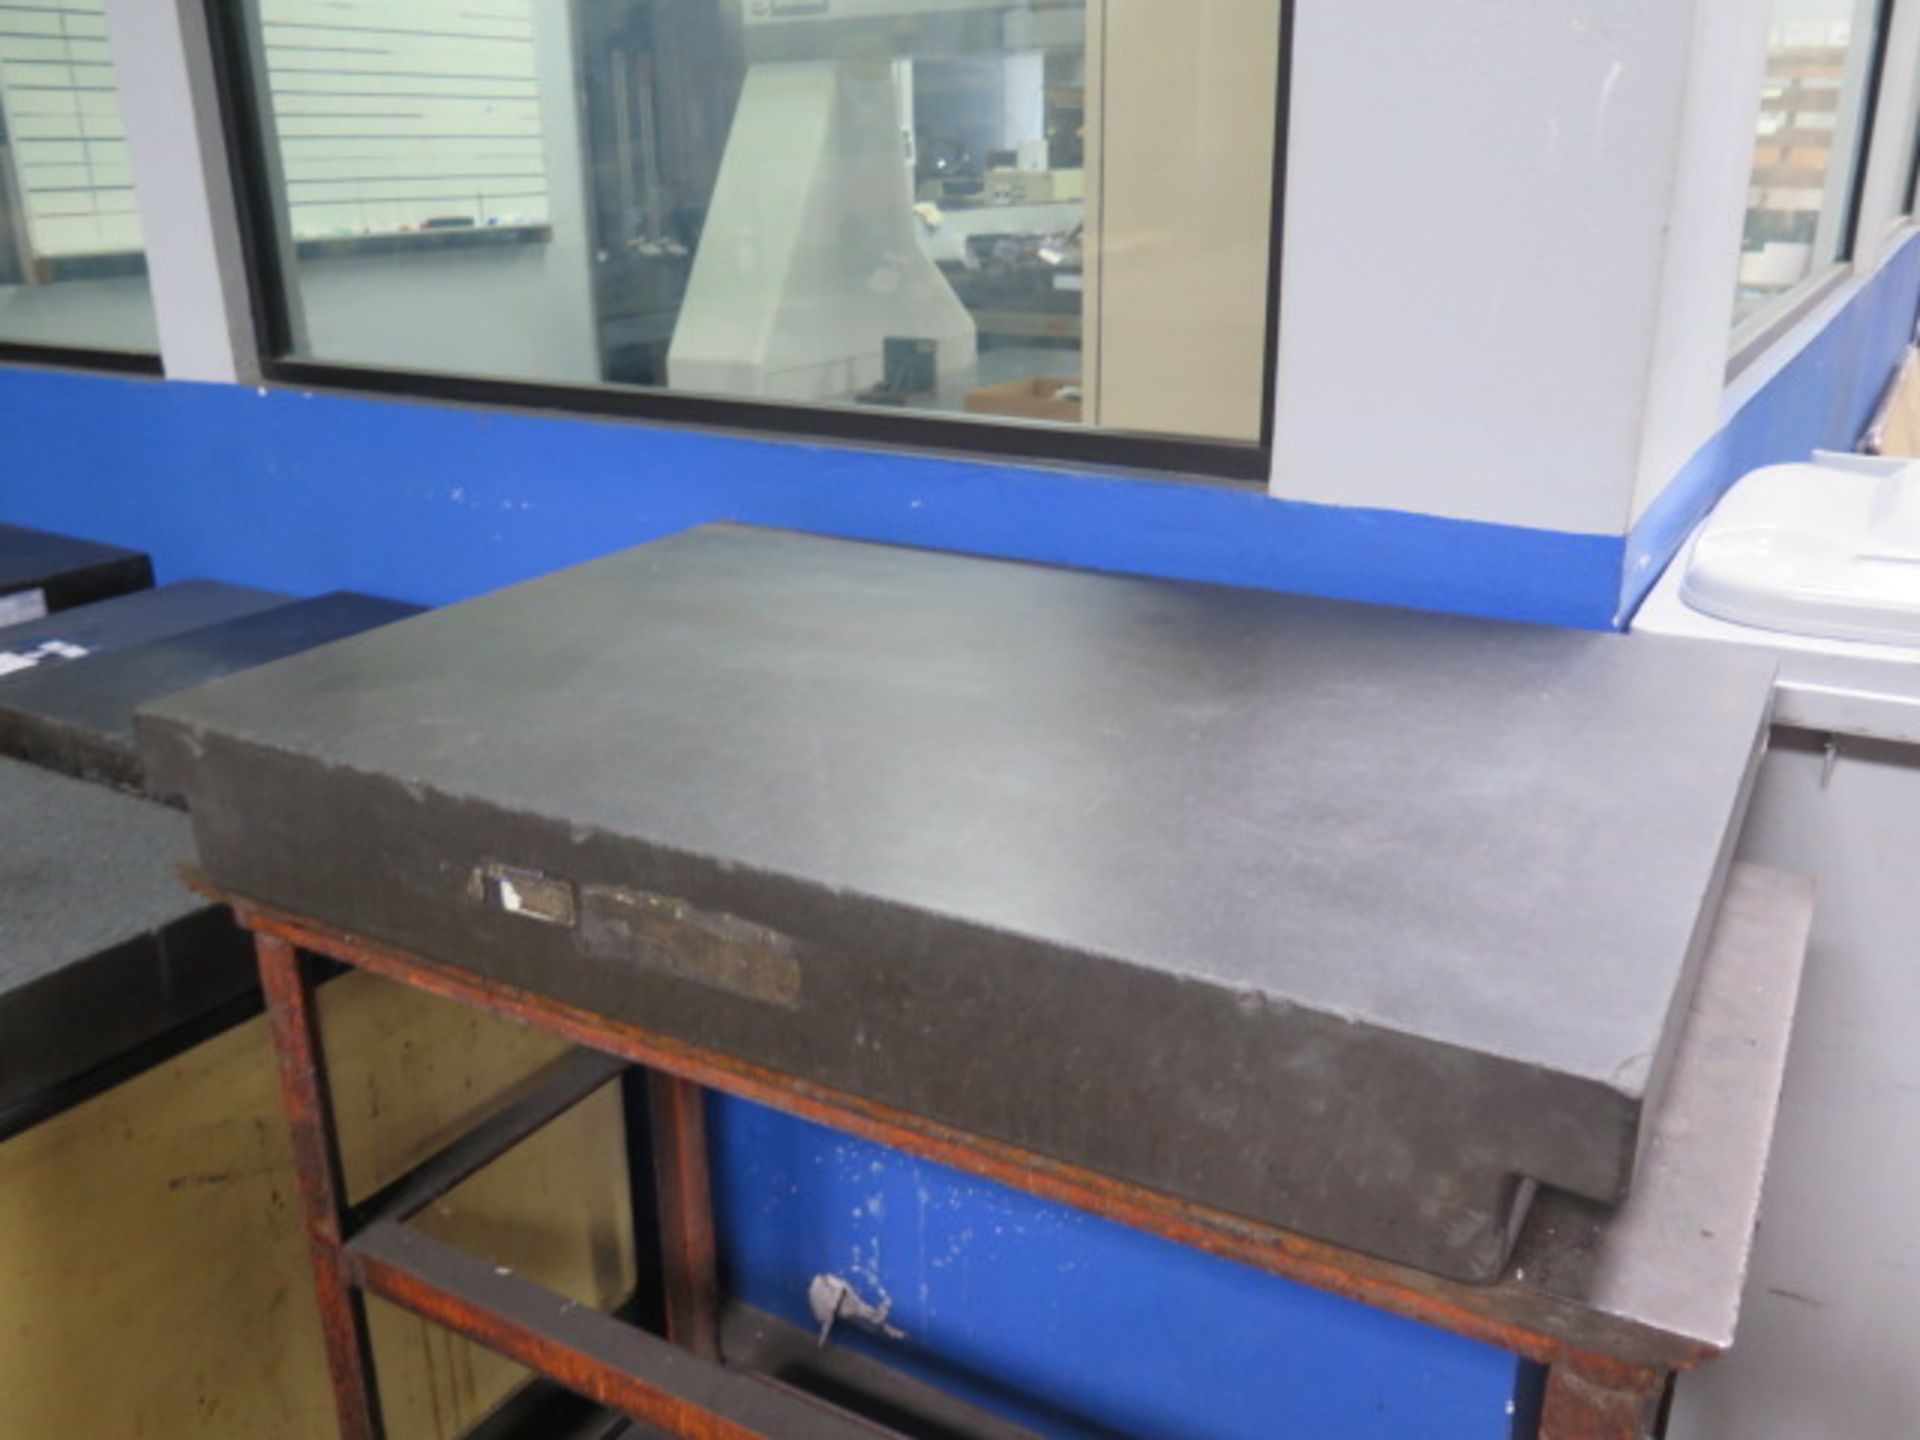 24” x 36” x 4 ½” 2-Ledge Granite Surface Plate w/ Rolling Stand (SOLD AS-IS - NO WARRANTY) - Image 2 of 4